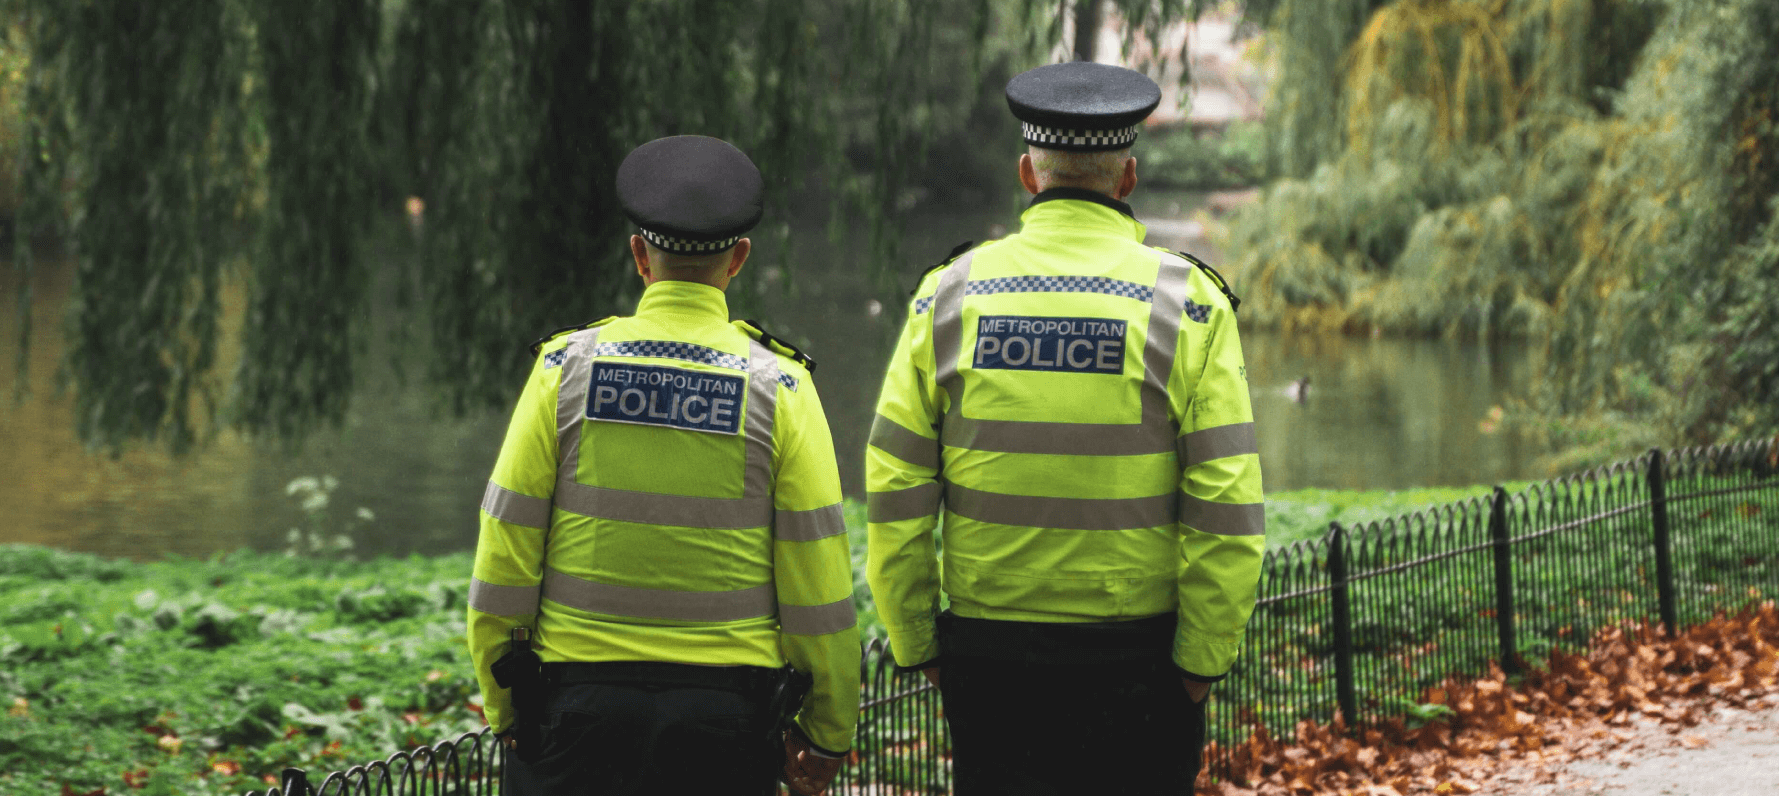 Ten ways VictimFocus is helping to address misogyny in our police forces